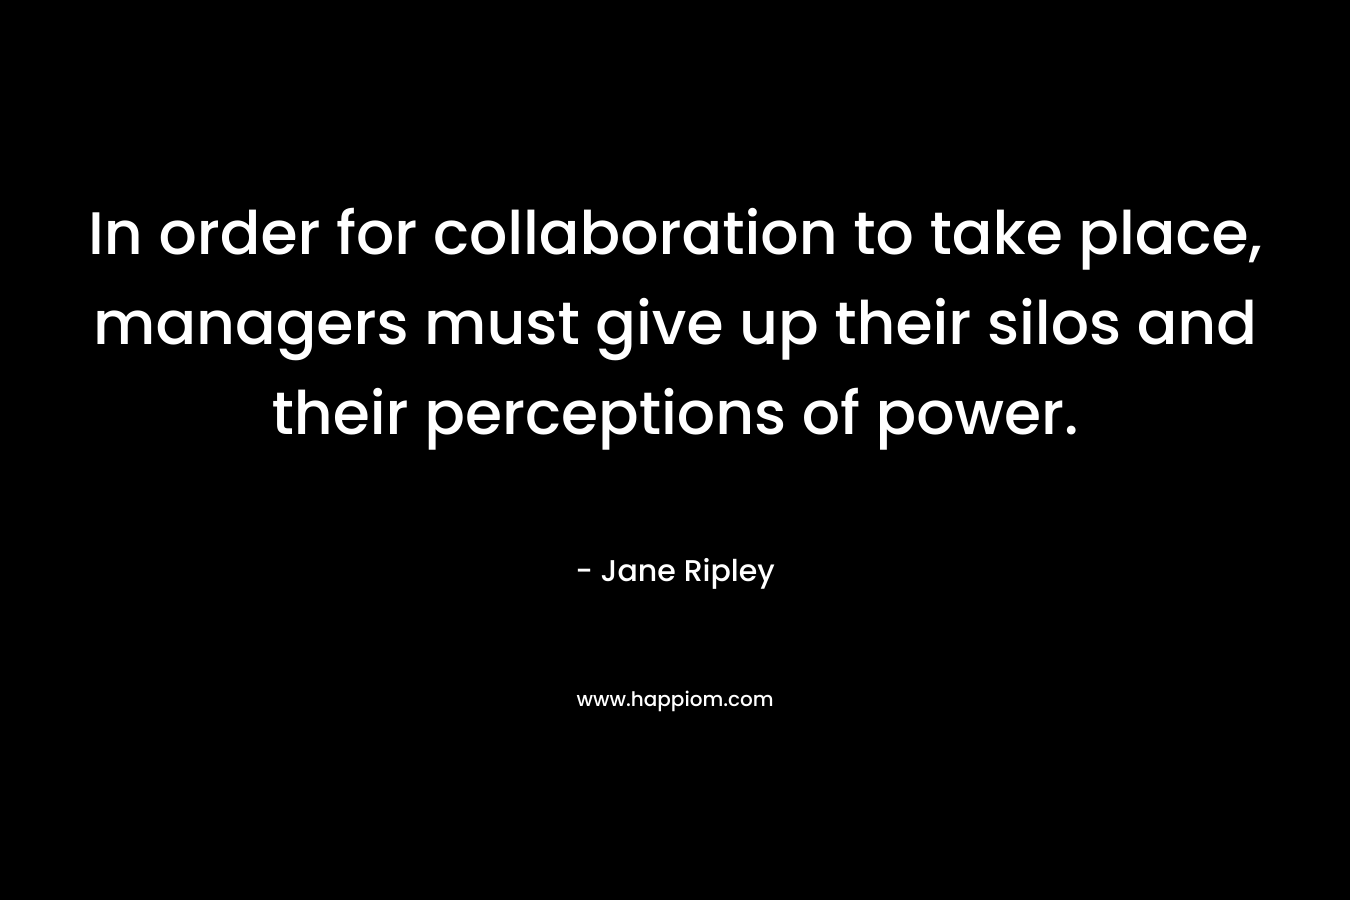 In order for collaboration to take place, managers must give up their silos and their perceptions of power.